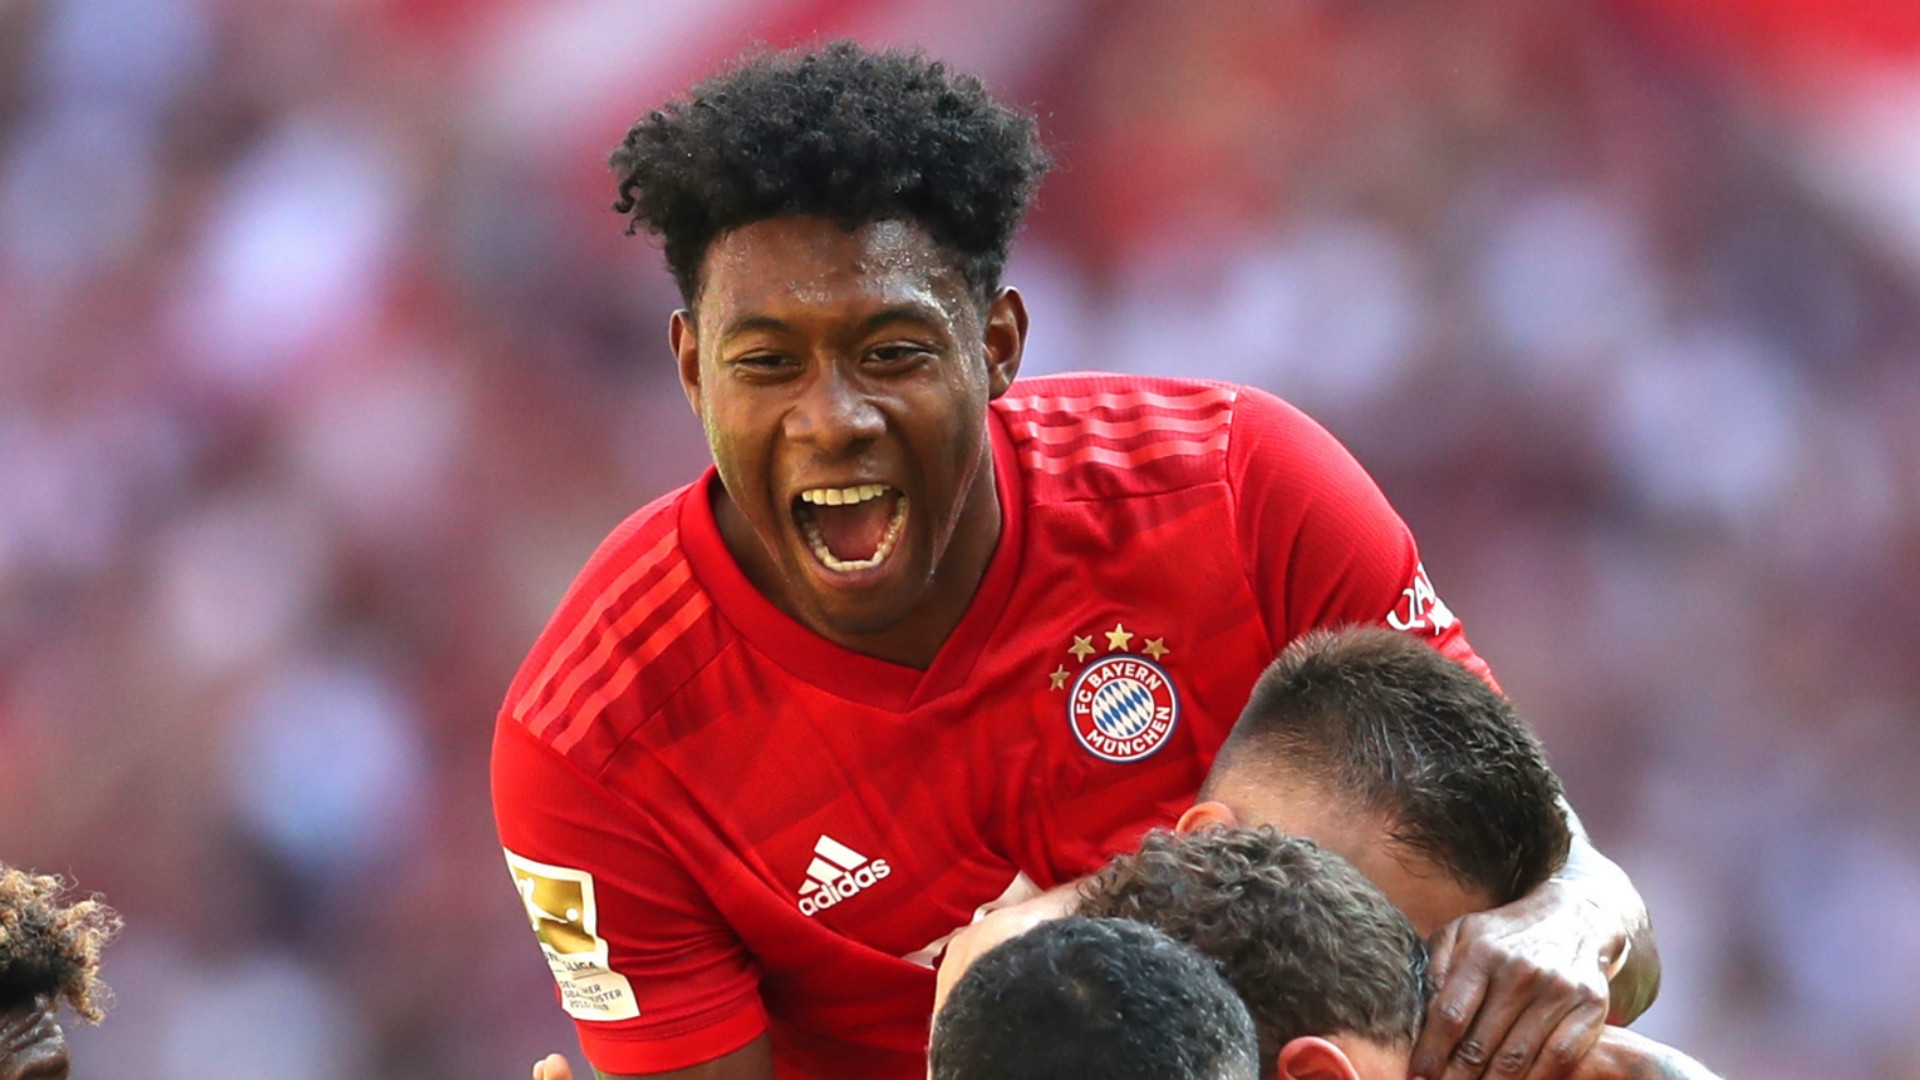 Happy birthday, David Alaba! We still want to know what that bear said to him 